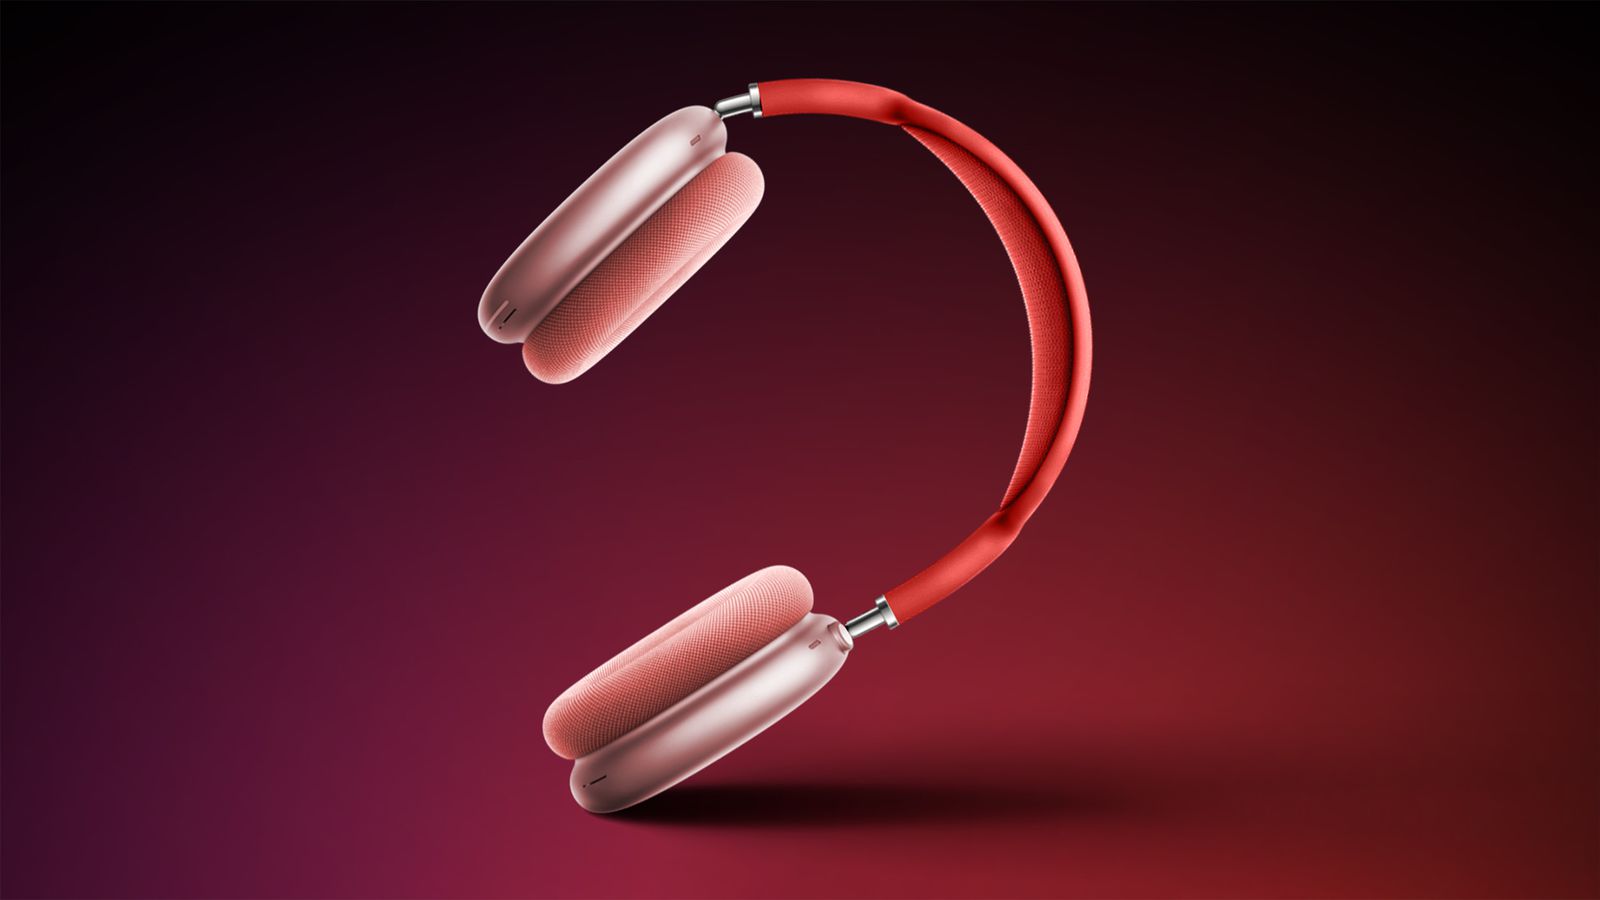 Next AirPods Max Could Adopt These Five Features From Beats Studio Pro and AirPods  Pro - MacRumors